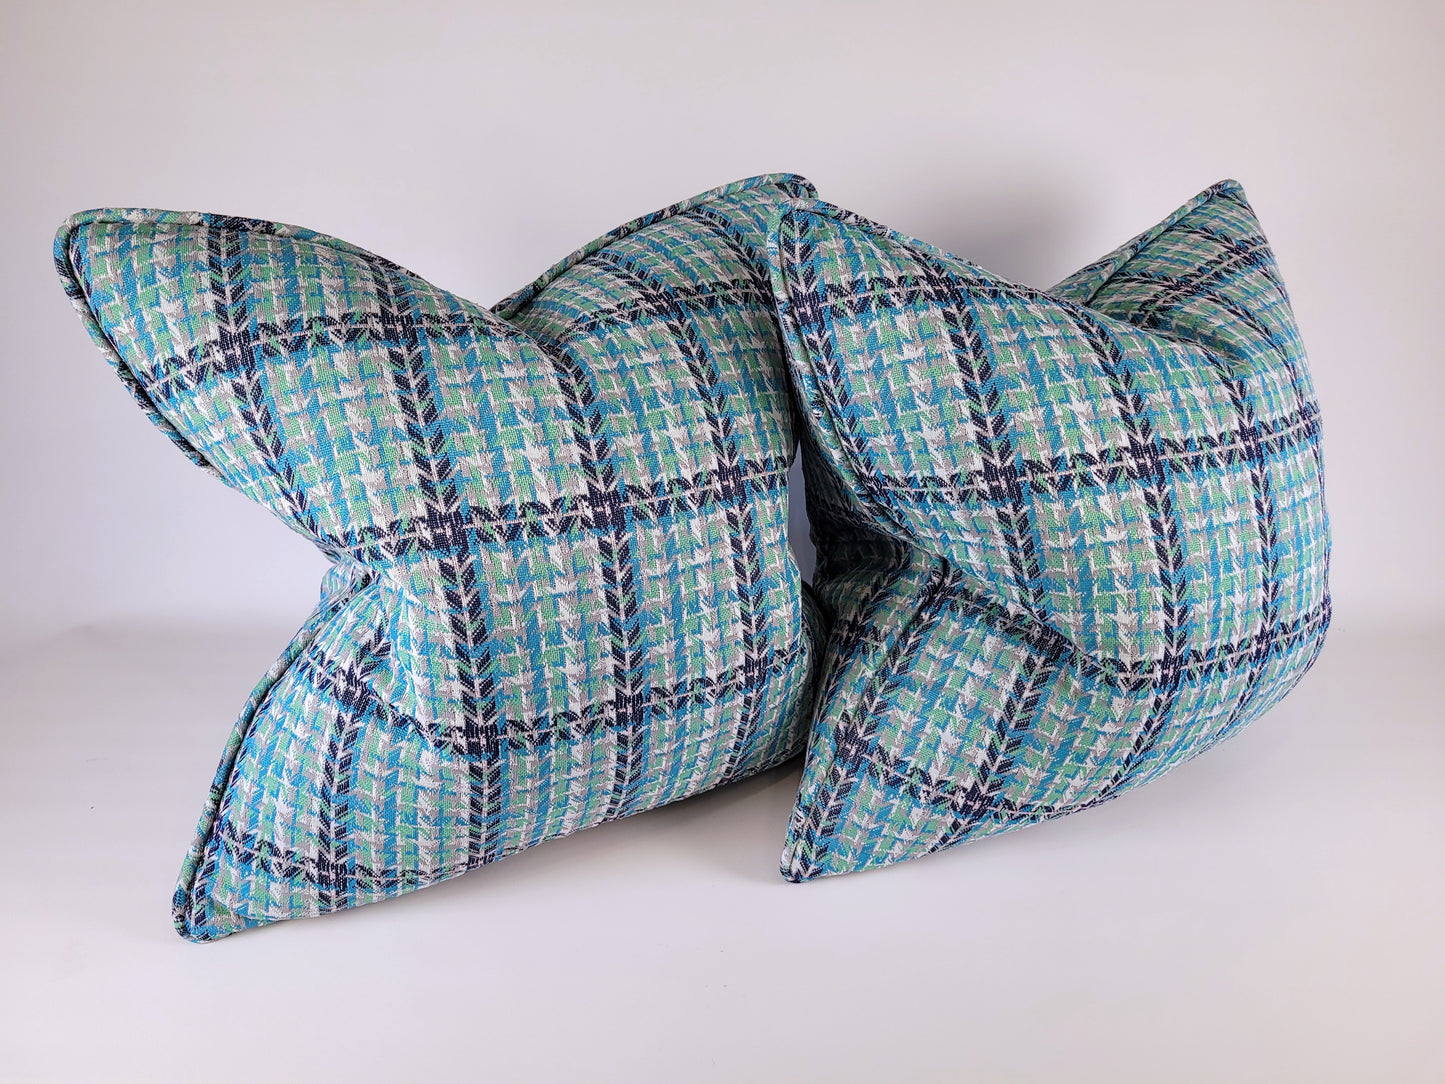 Vintage Early 1970s Navy Blue, Turquoise Blue, Grey, Green Double Knit Pillow 20"